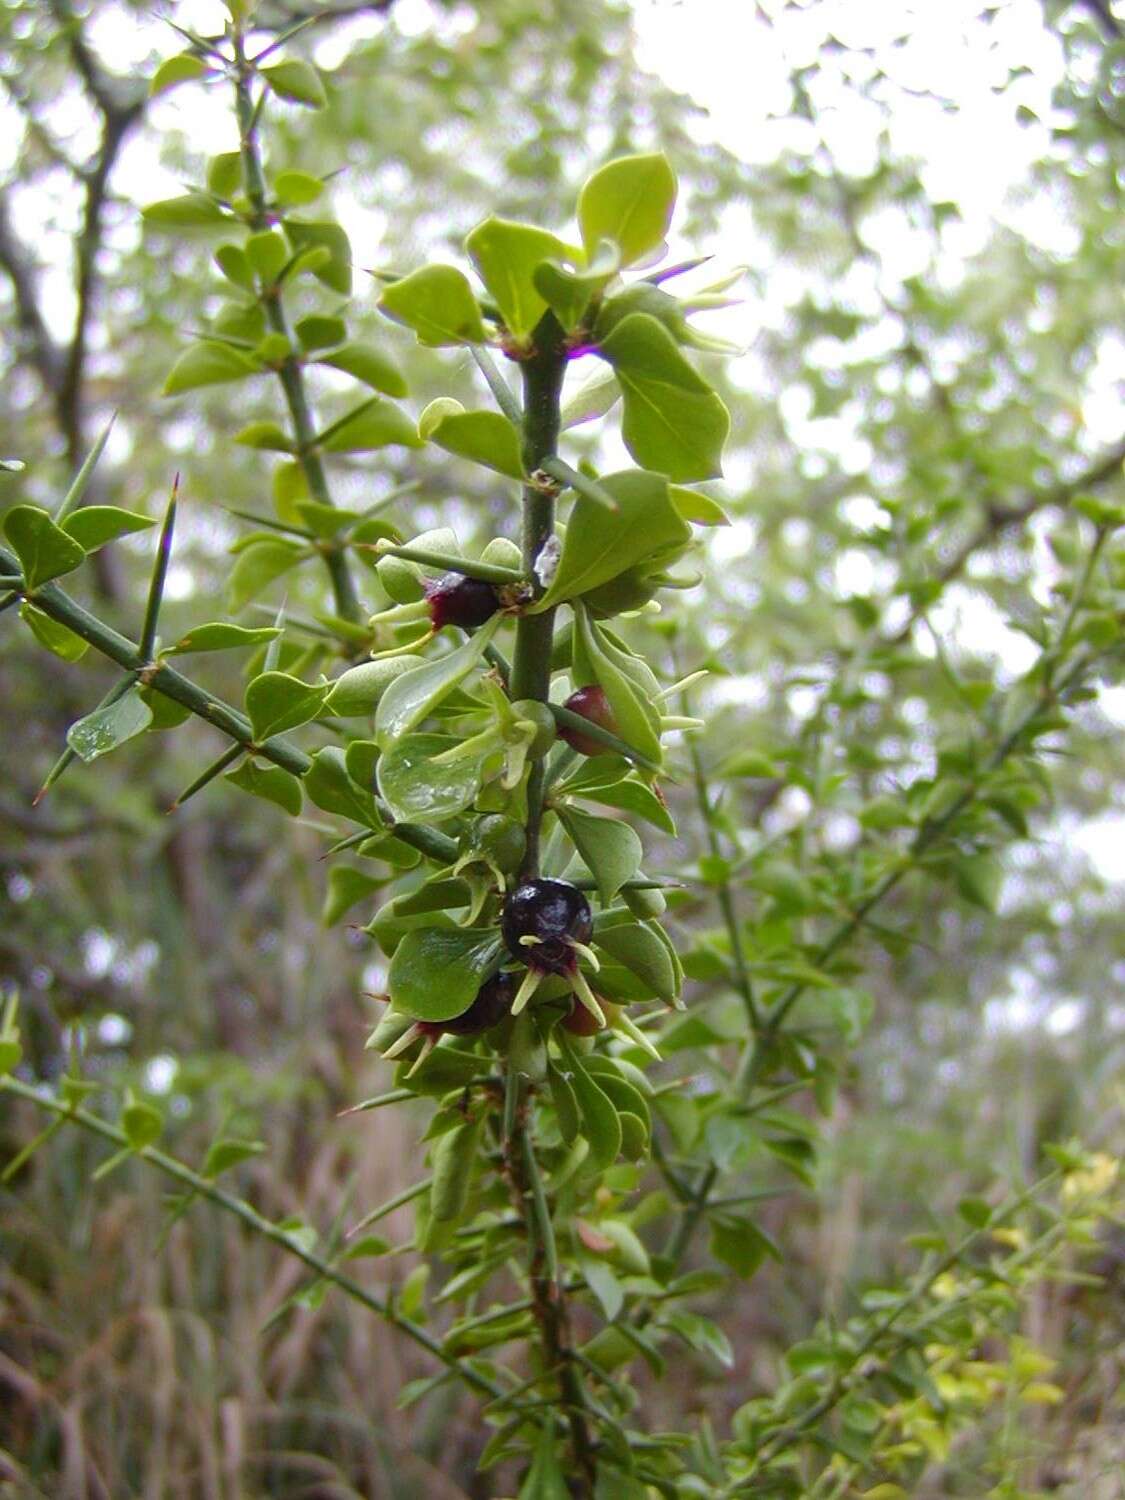 Image of tropical lilythorn